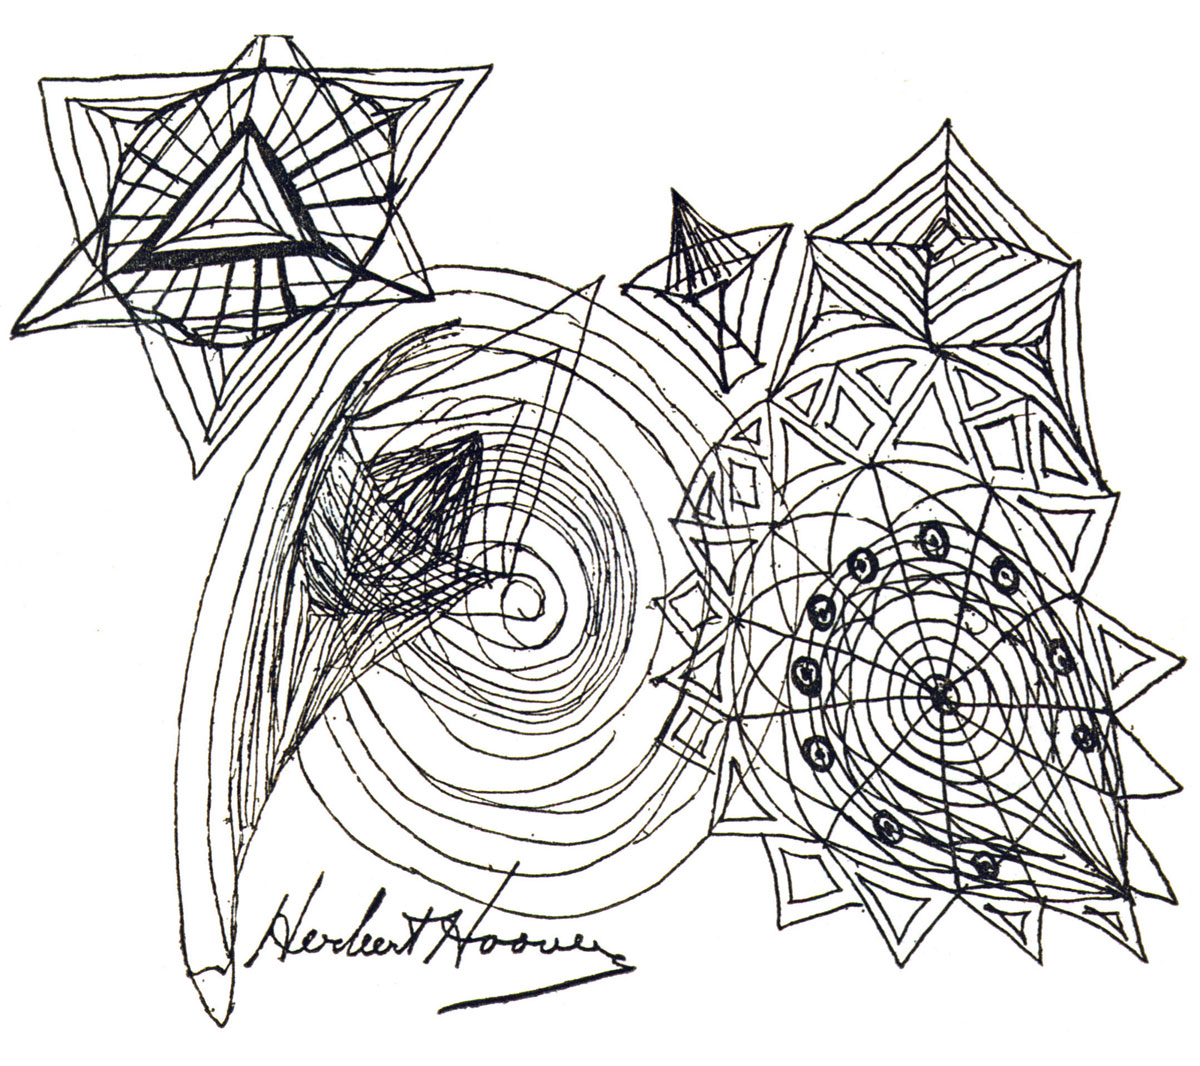 Geometric designs drawn (and signed) by Hoover.